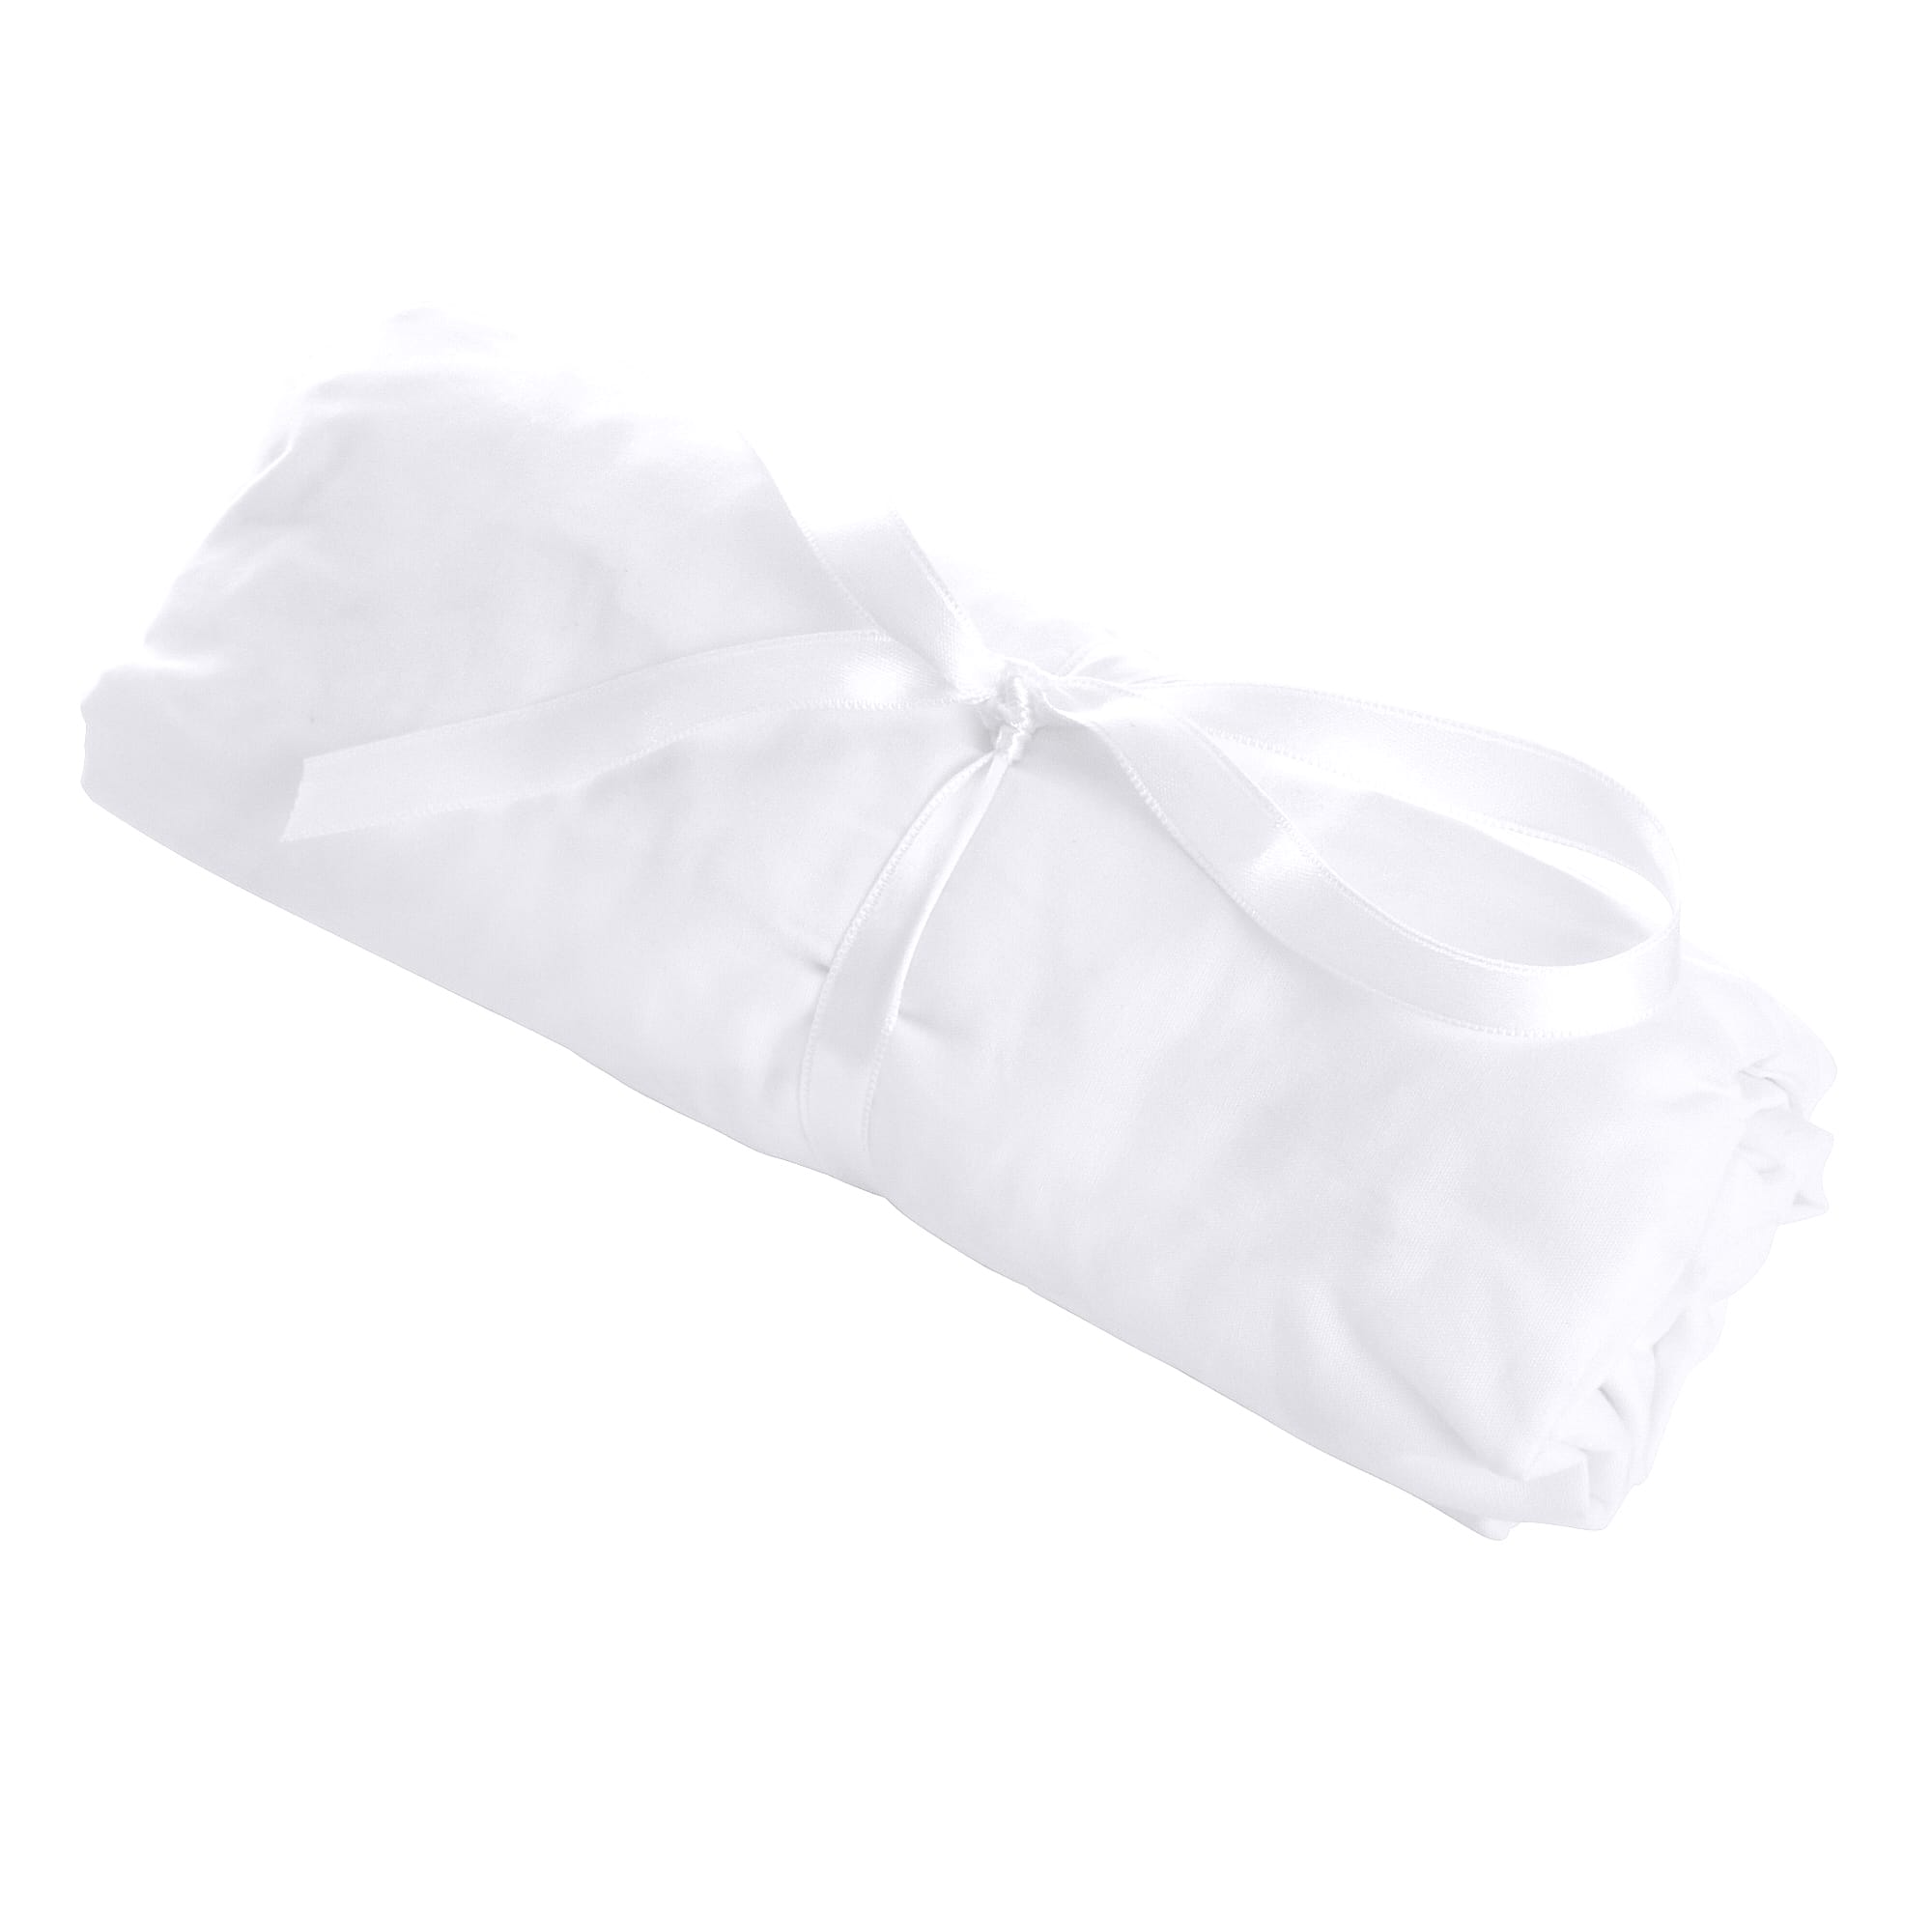 Theophile & Patachou Cot Bed Fitted Sheet 70X140 cm - White